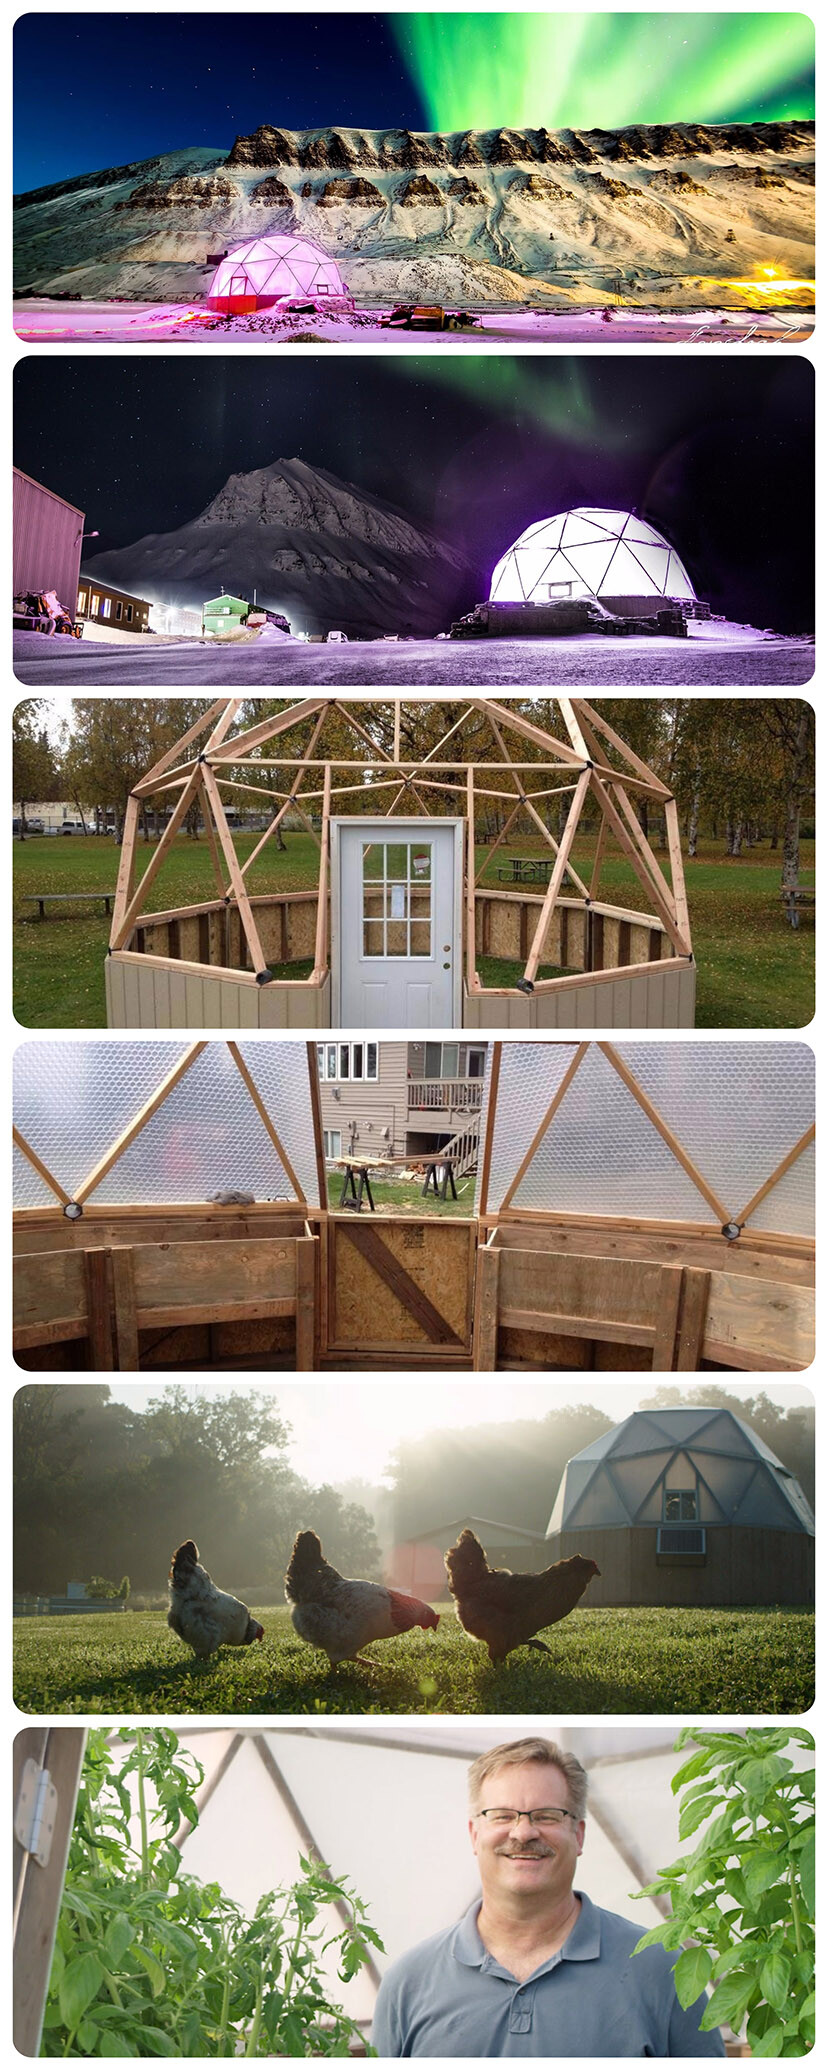 Artic Dome Greenhouse image collage